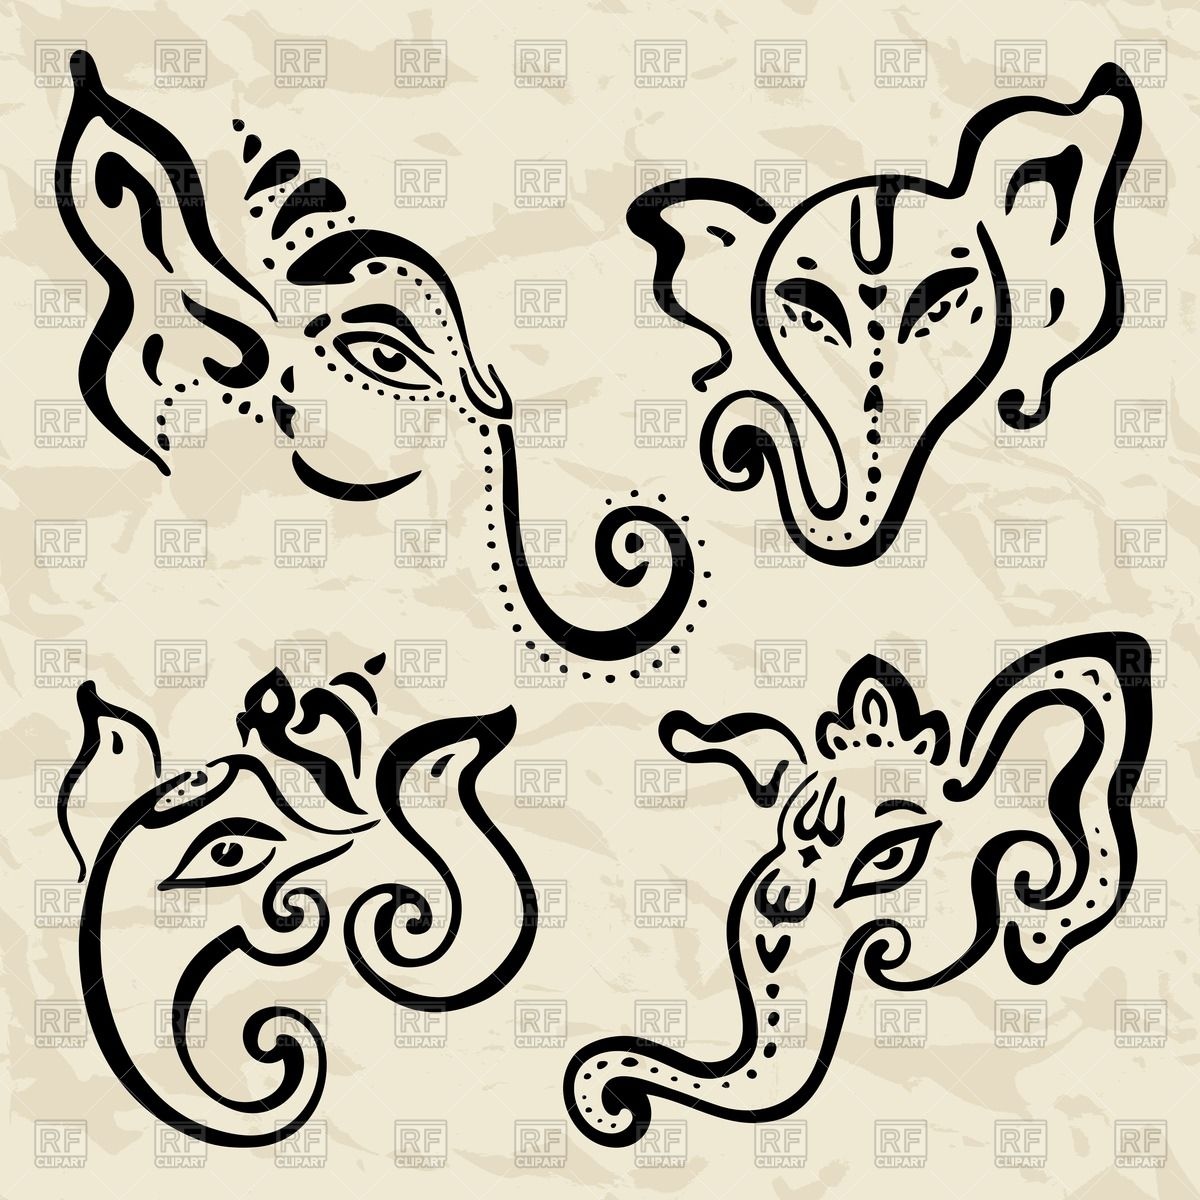 Contours Of Hindu God Ganesh Silhouettes Outlines Download Royalty